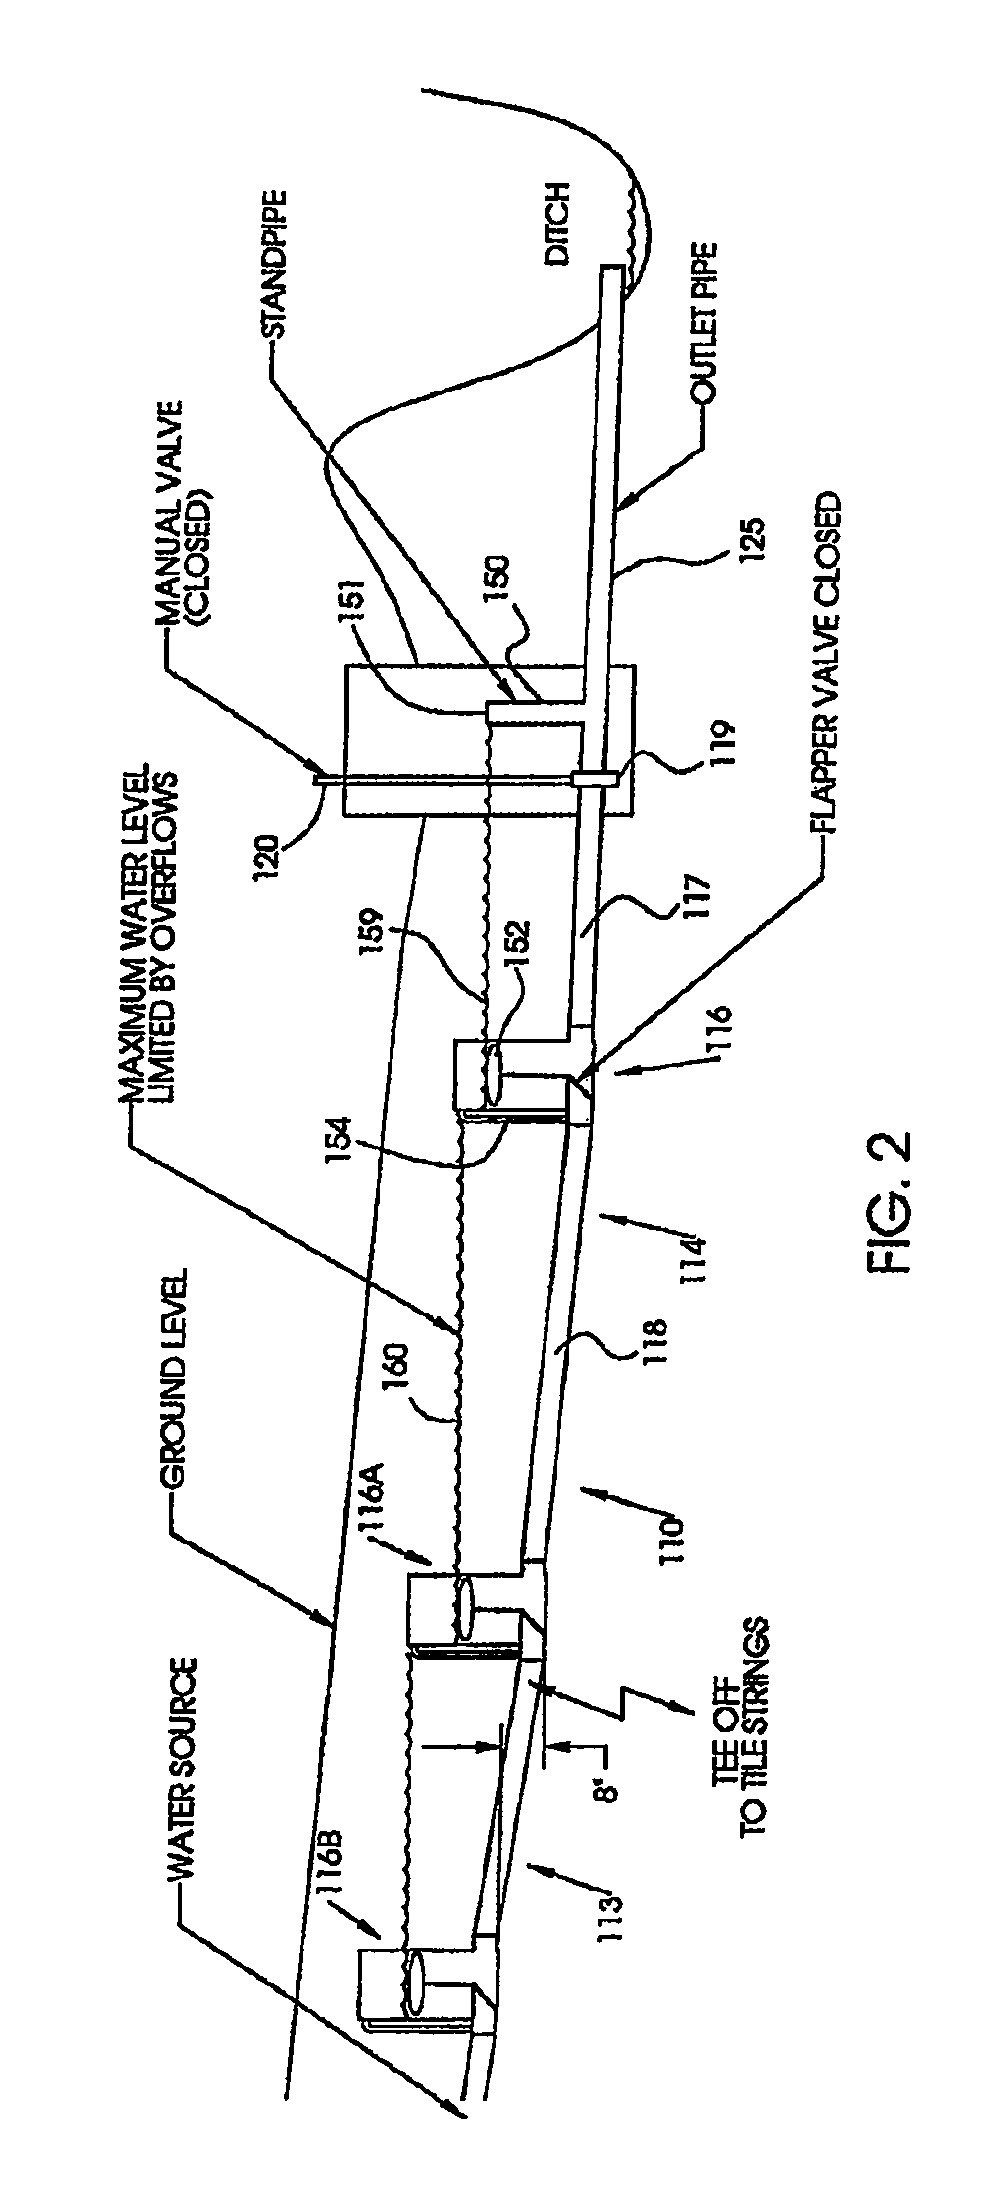 Method and apparatus for controlling drainage and irrigation of fields